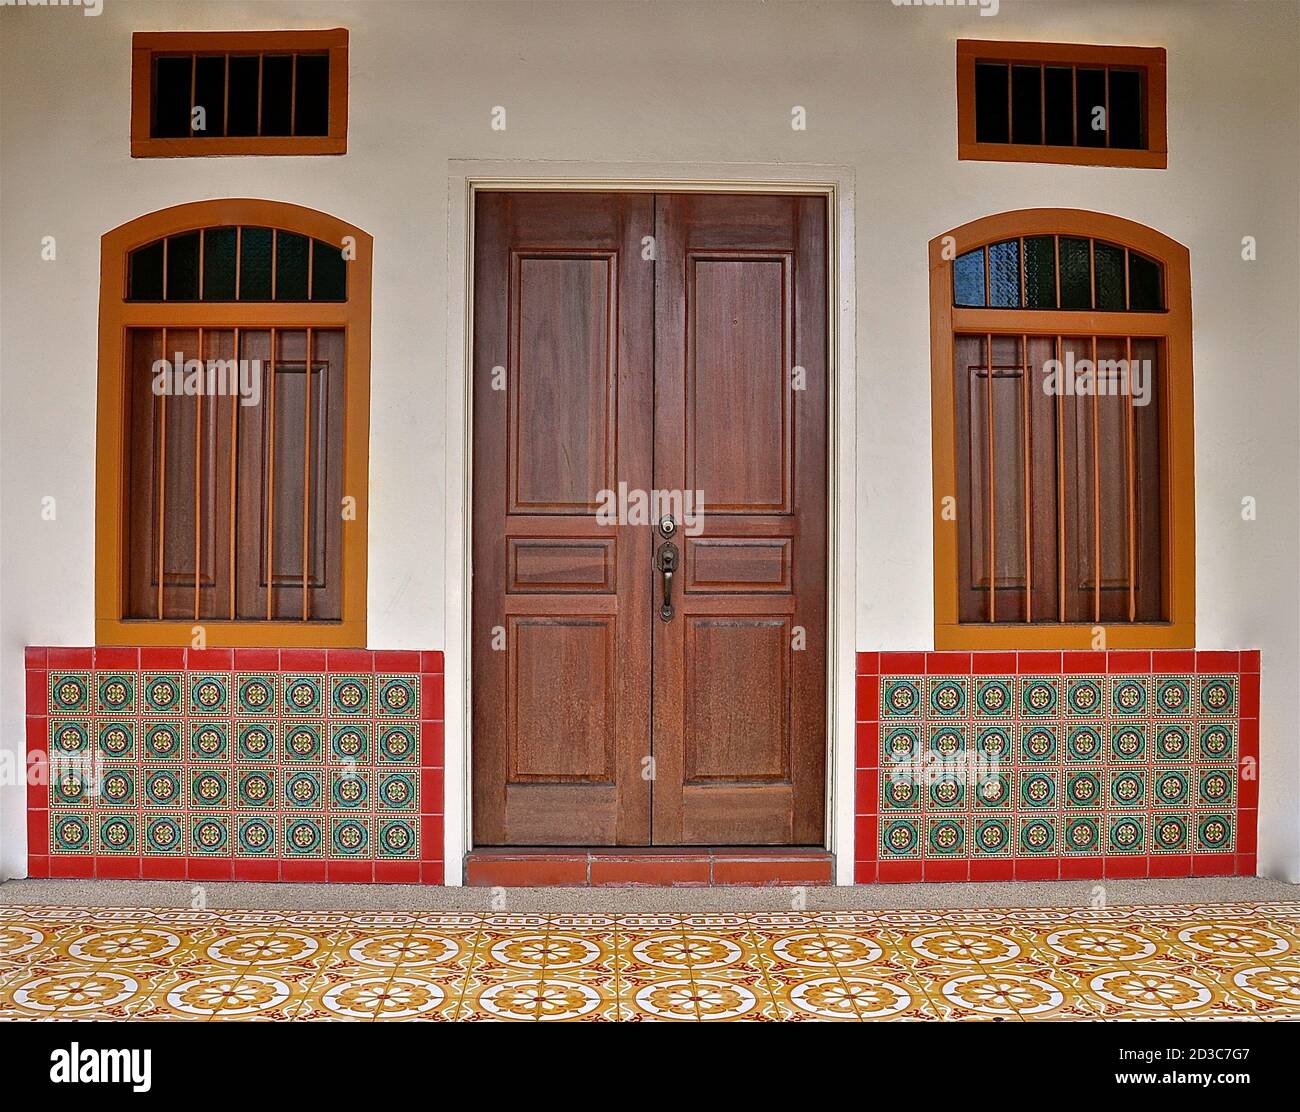 Frontage of a traditional Peranakan style Chinese shop house, with colourful geometric tile patterns on the facade. Stock Photo